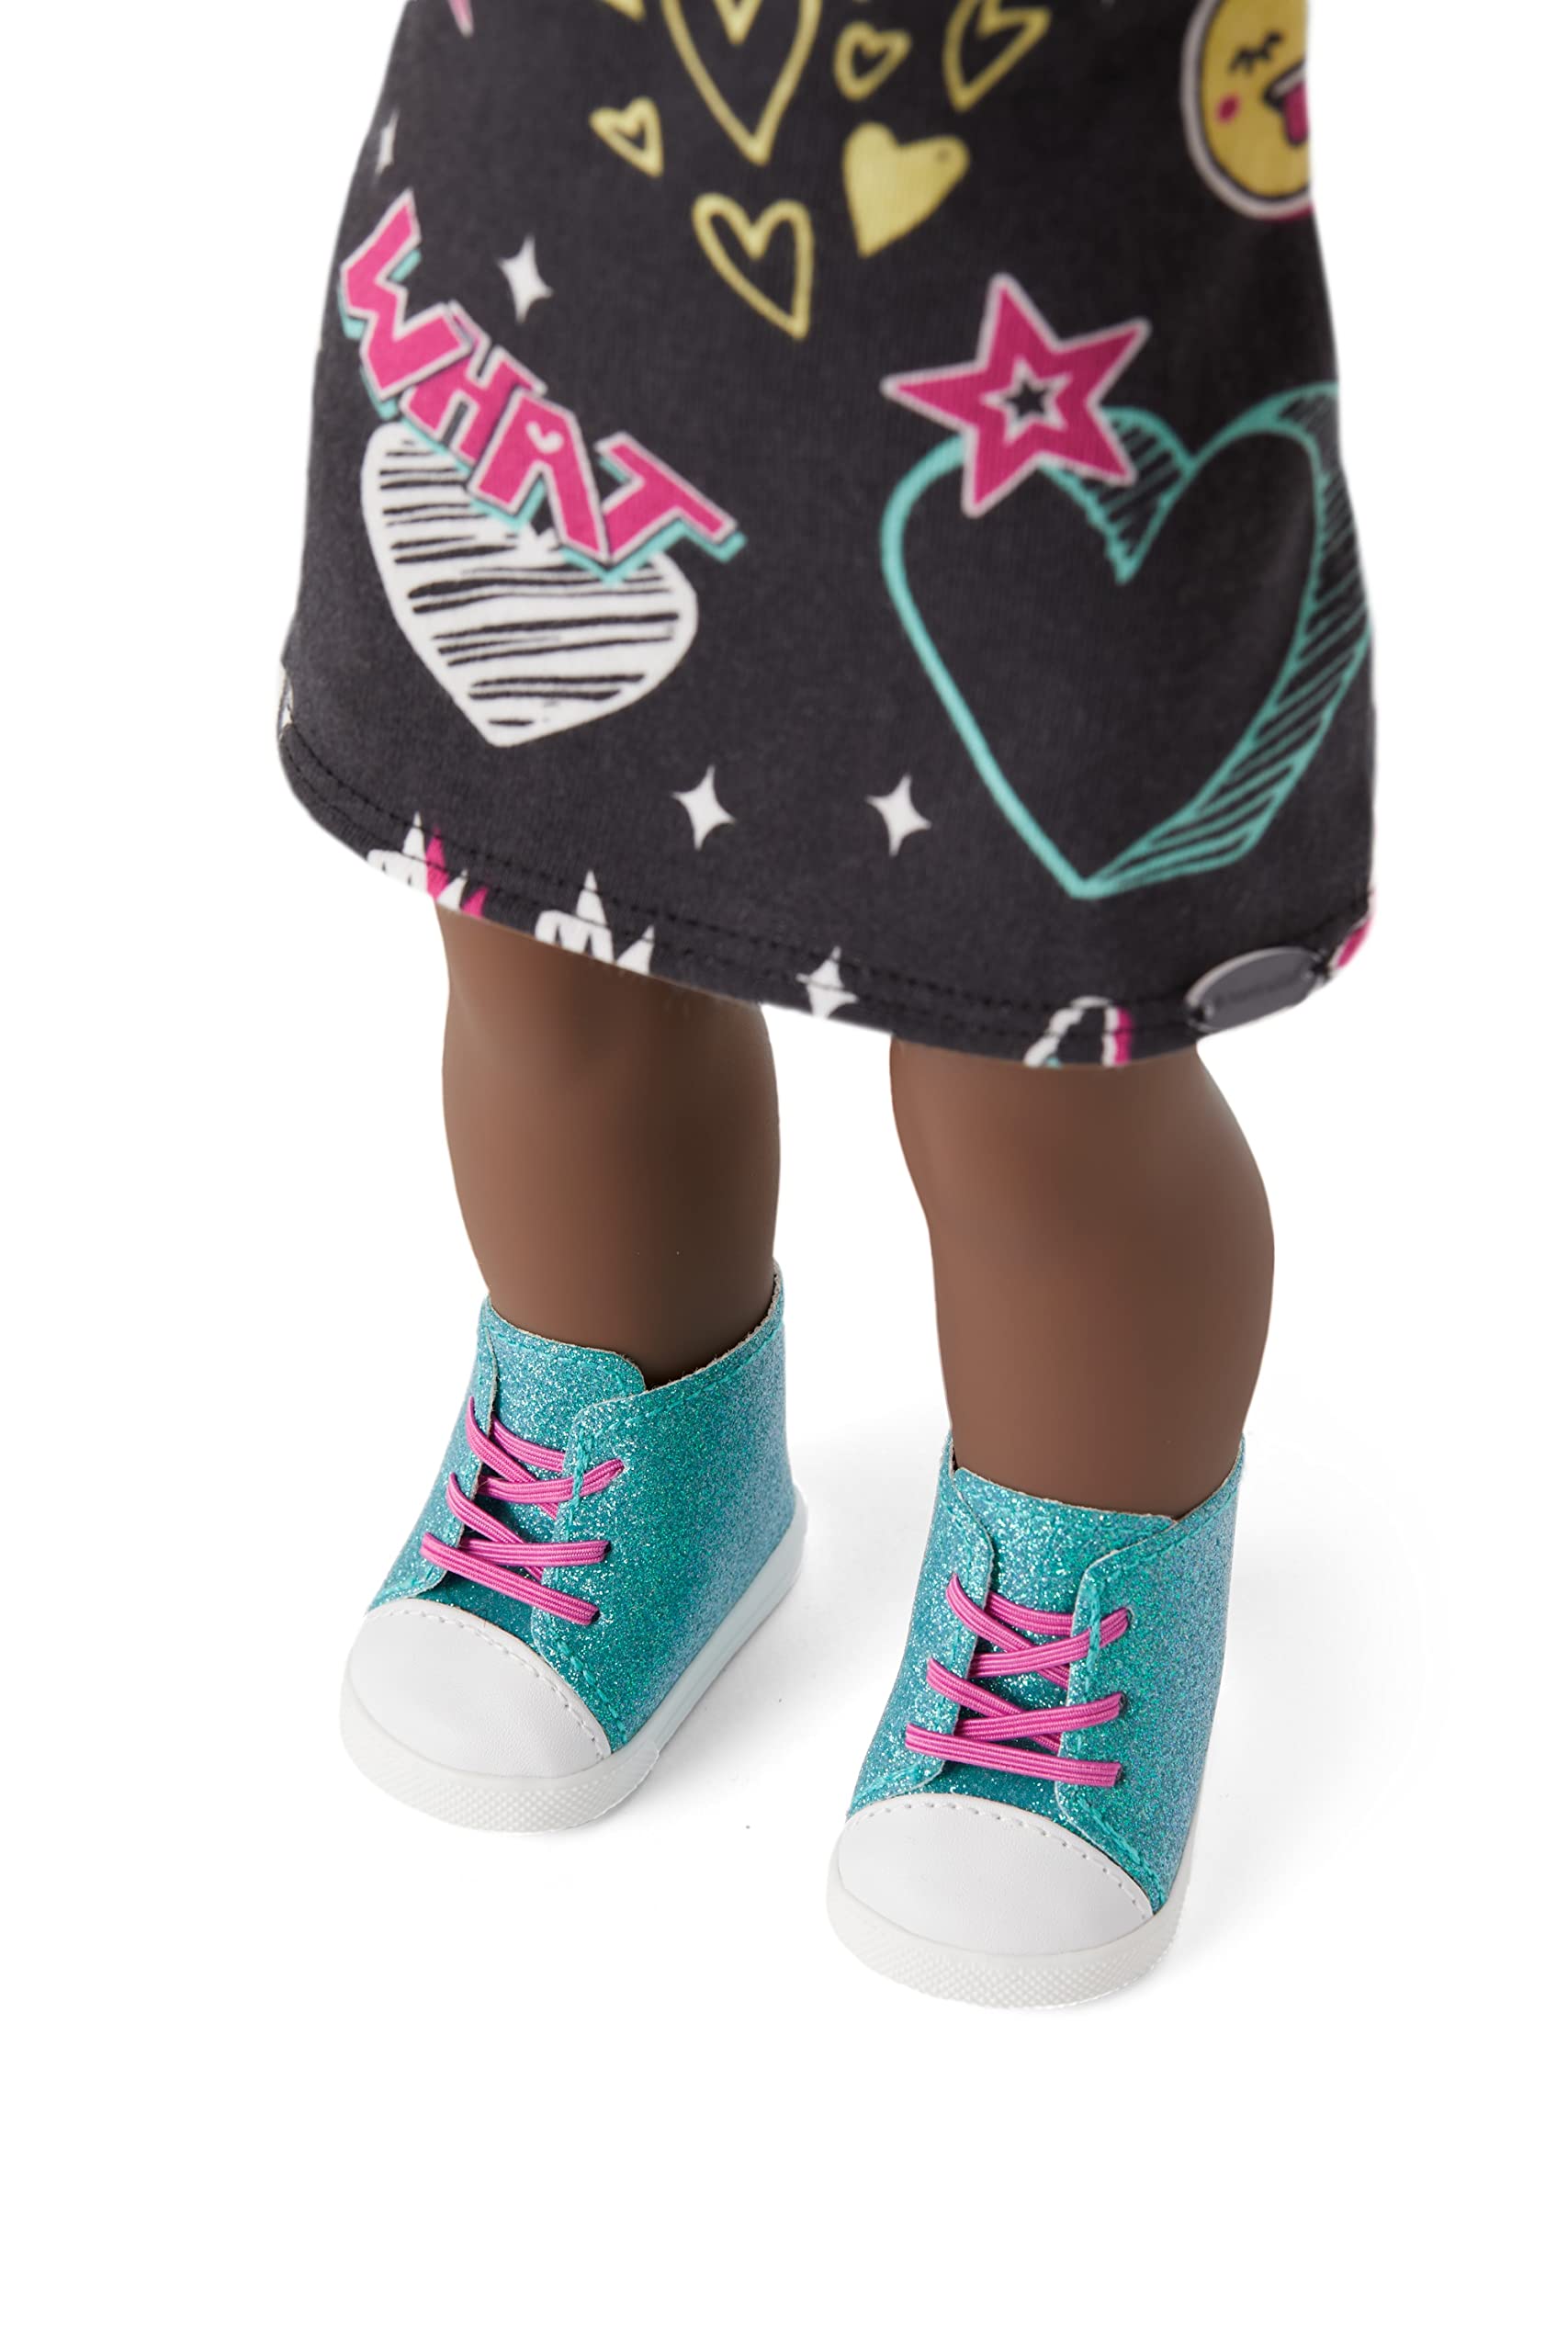 American Girl Truly Me 18-inch Doll Show Your Wild Side Outfit with T-shirt Dress and High-Top Sneakers, For Ages 6+